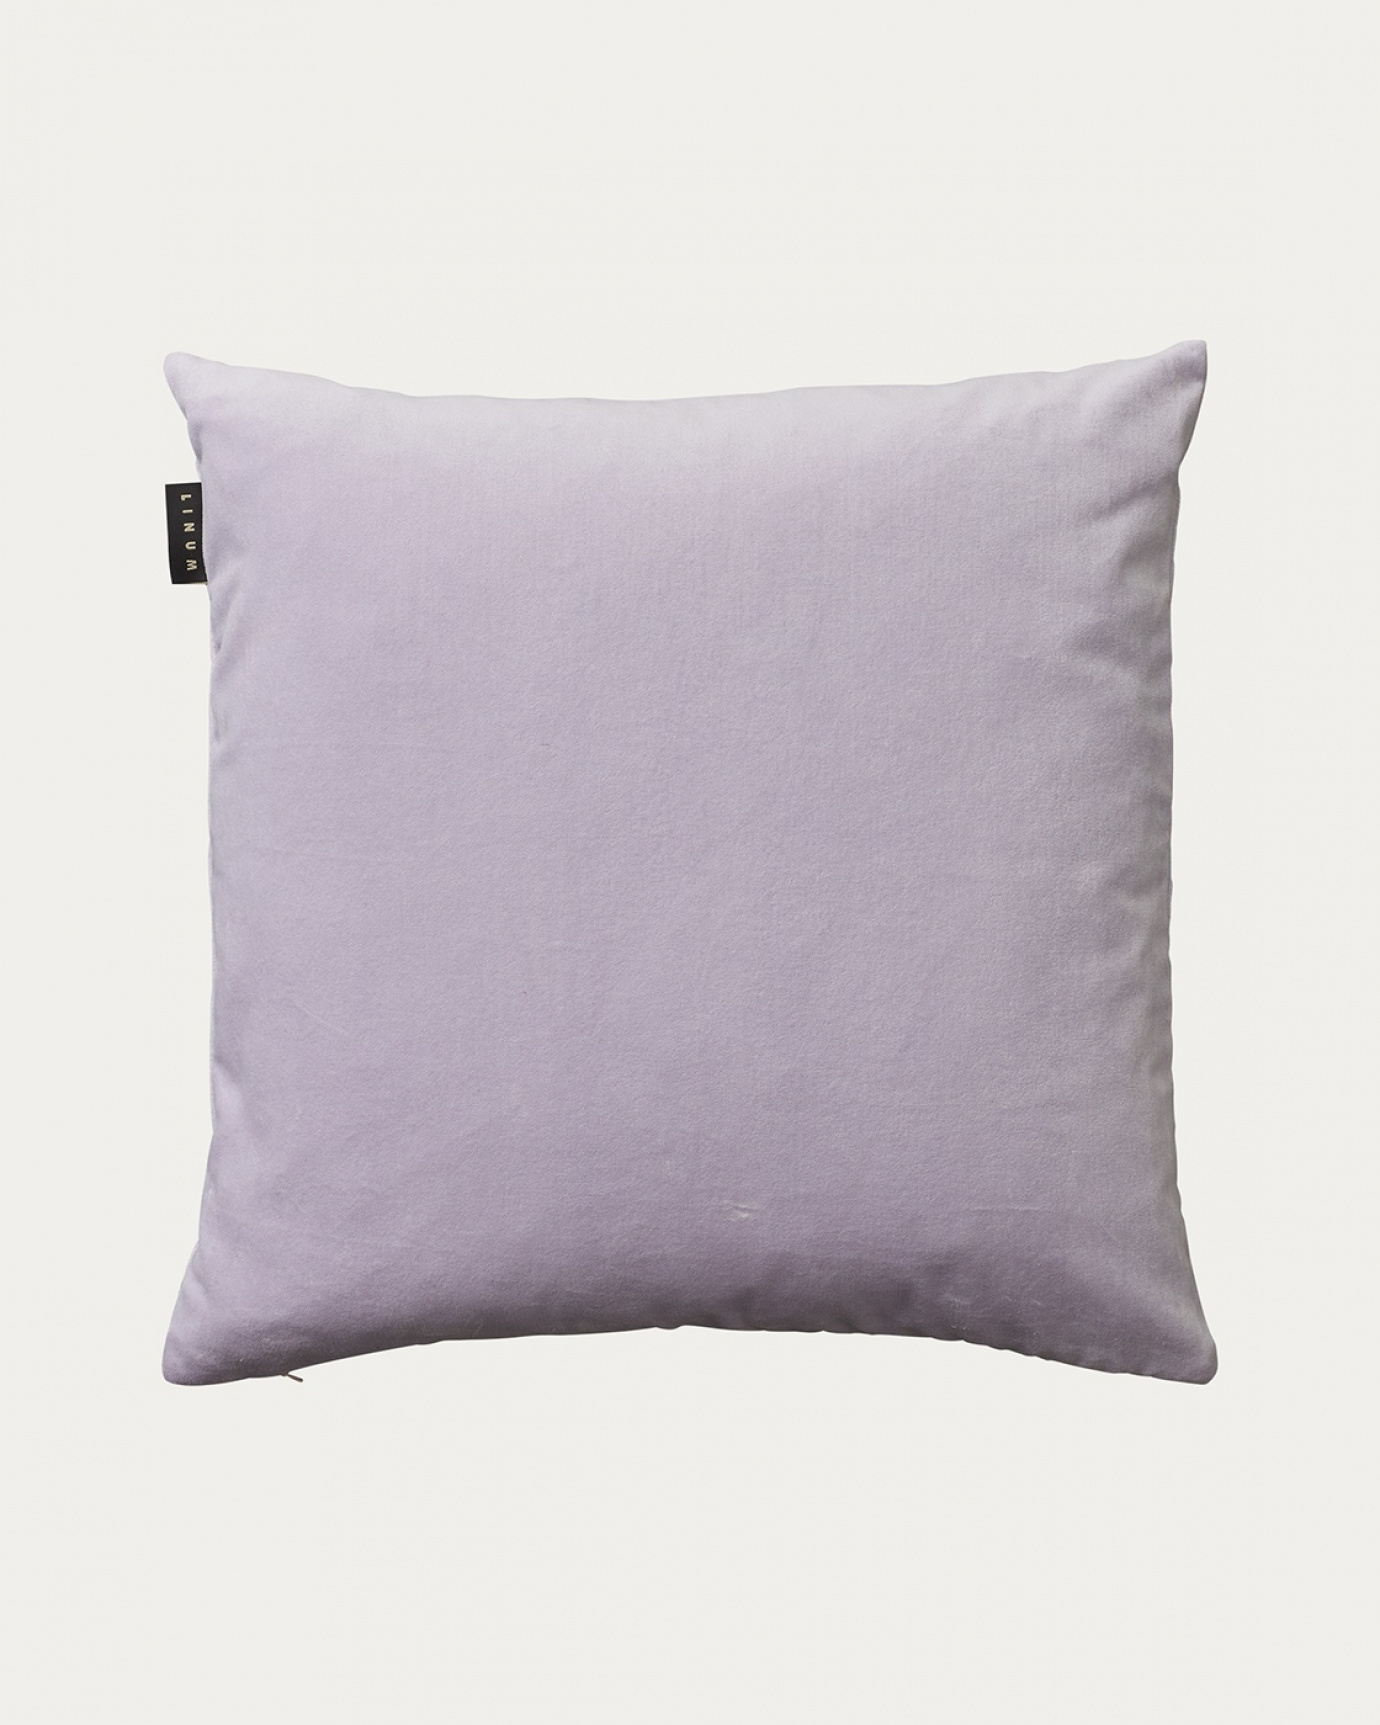 Product image bright lavender purple PAOLO cushion cover in soft cotton velvet from LINUM DESIGN. Size 50x50 cm.